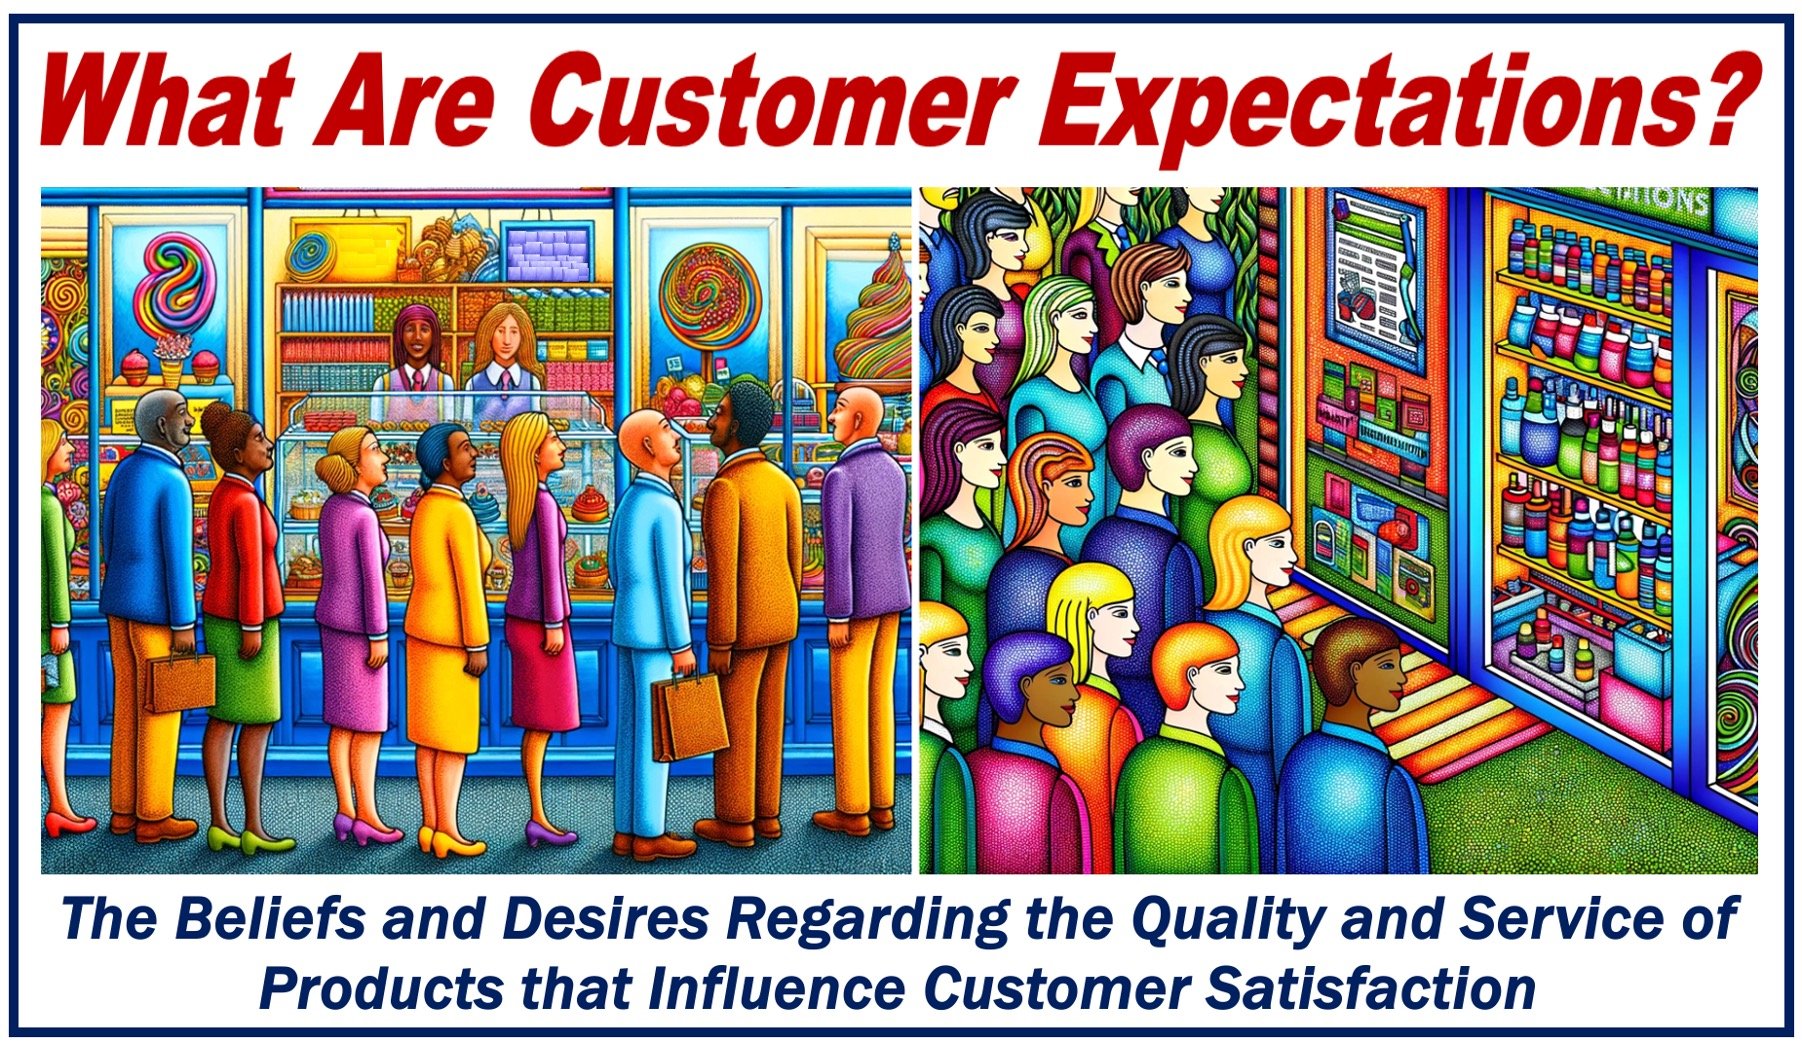 Lots of customers looking at products plus a definition of Customer Expectations.